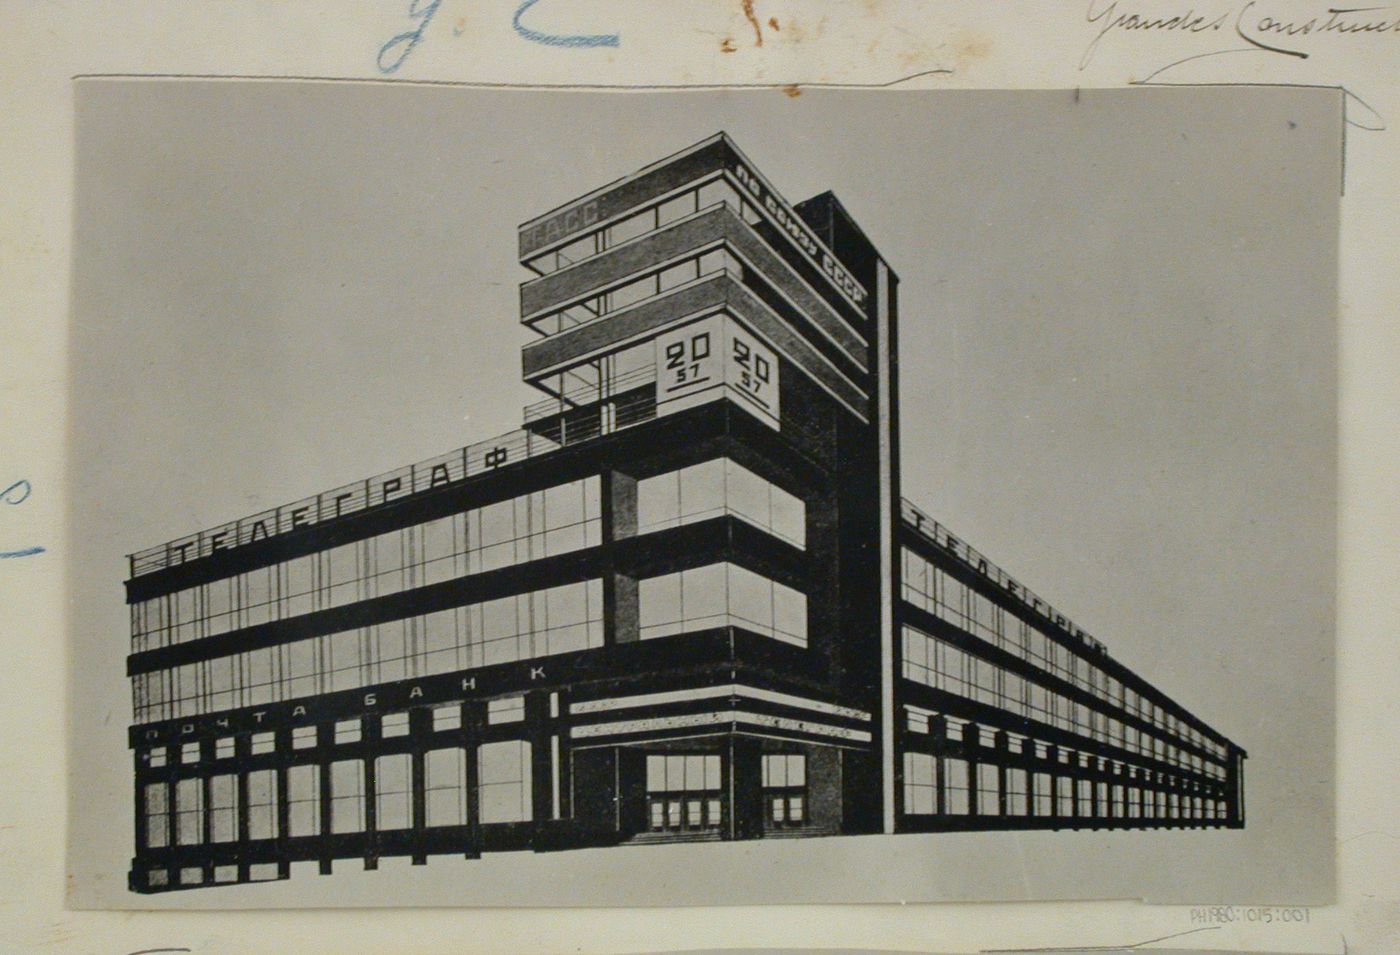 Photograph of a drawing for the Telegrafnoe agentstvo SSSR (also known as TASS [Telegraph Agency of the Soviet Union]; now ITAR-TASS) building, Moscow, USSR (now Russia)